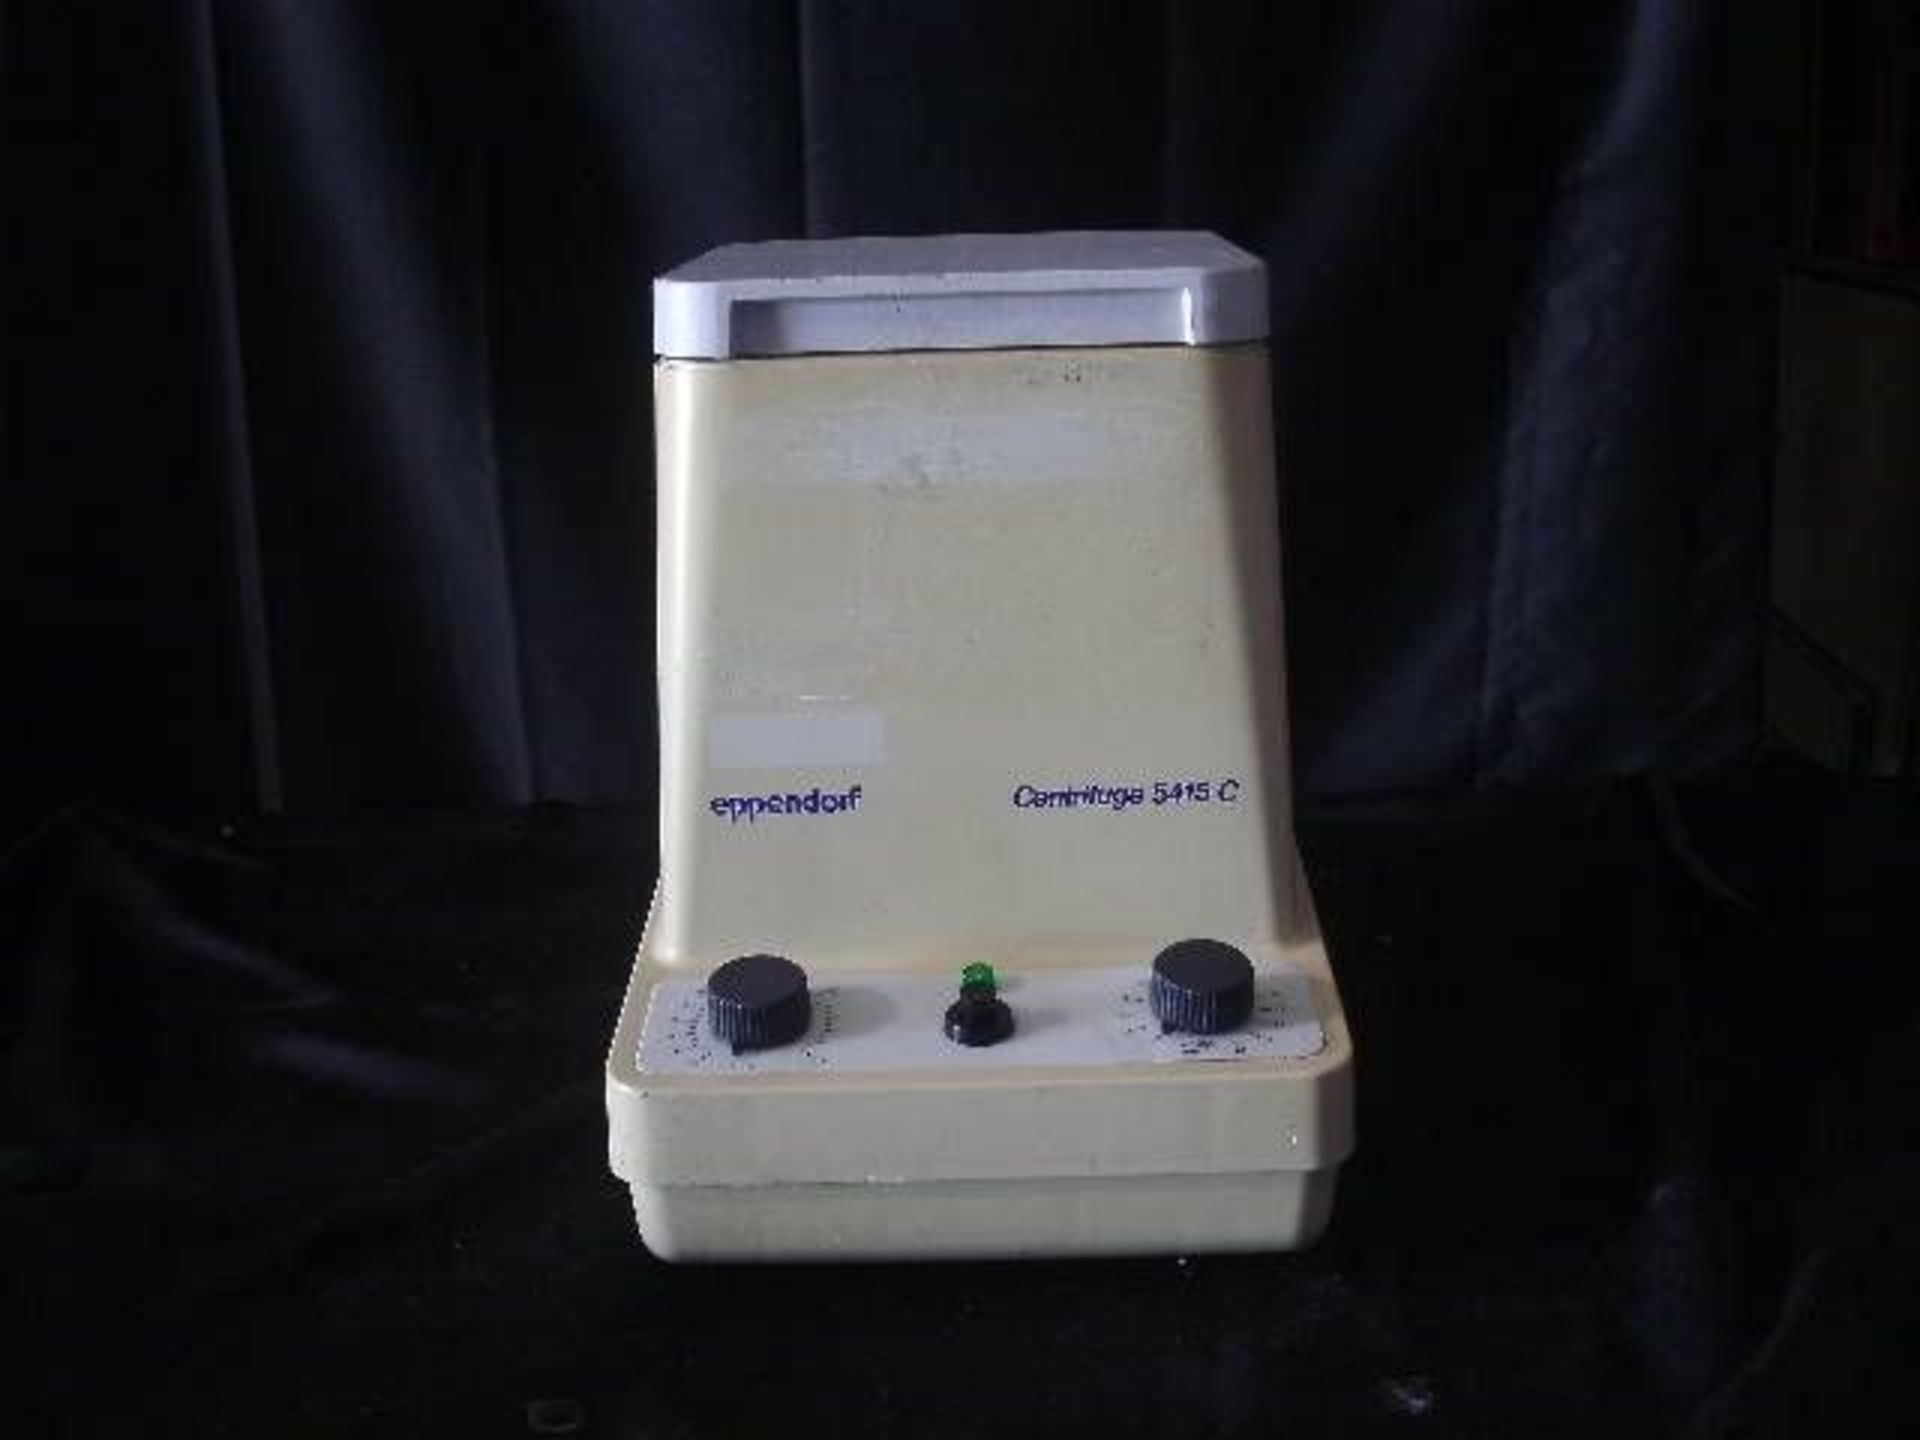 Eppendorf Centrifuge 5415C 5415 C with 18 Place Rotor 14,000 RPM, Qty 2, 320831805483